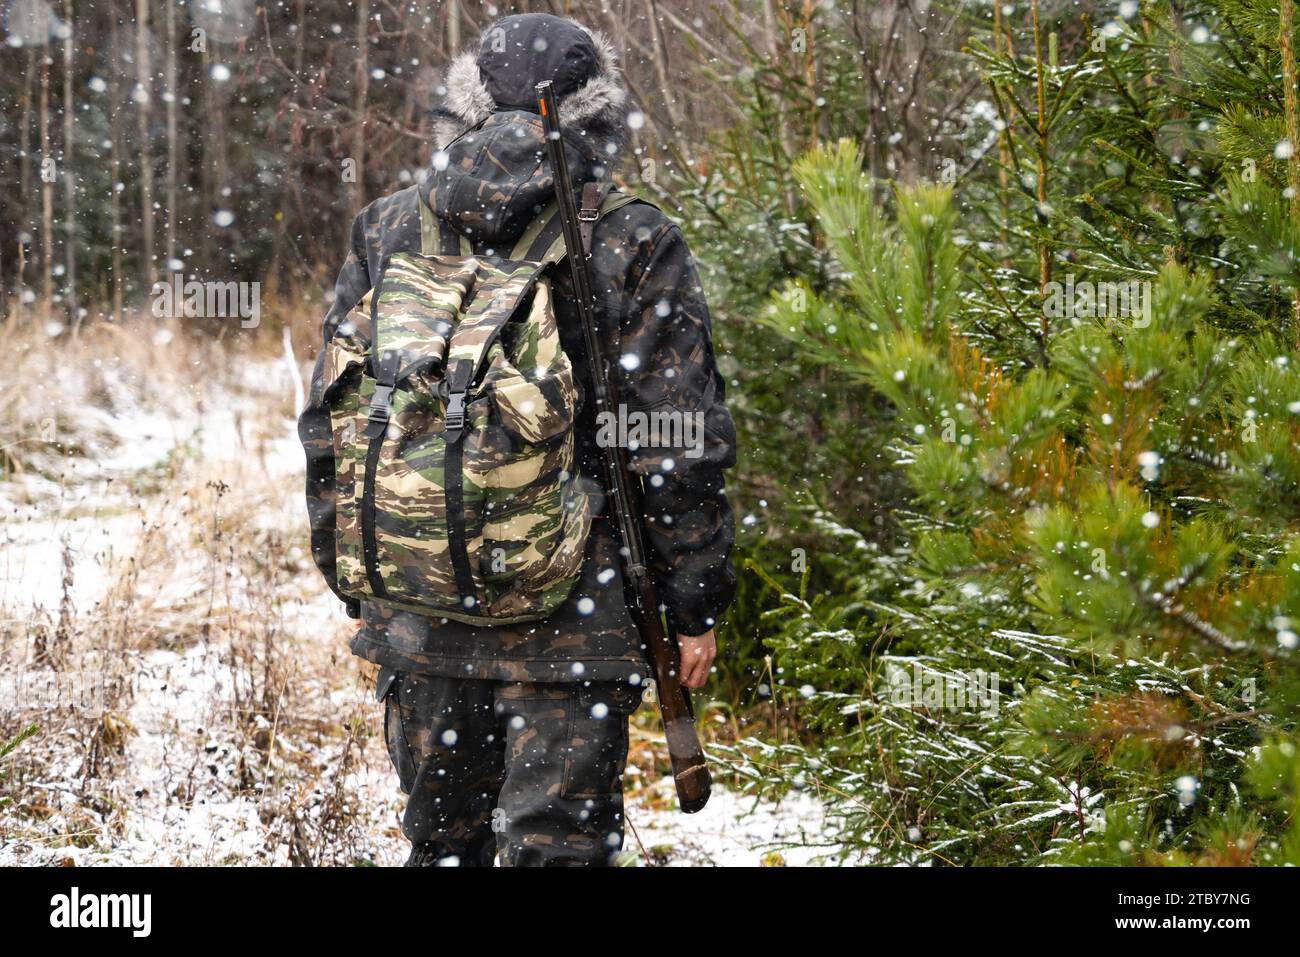 Male hunter in camouflage and with backpack, armed with a rifle, walks through the snowy winter forest.. Stock Photo